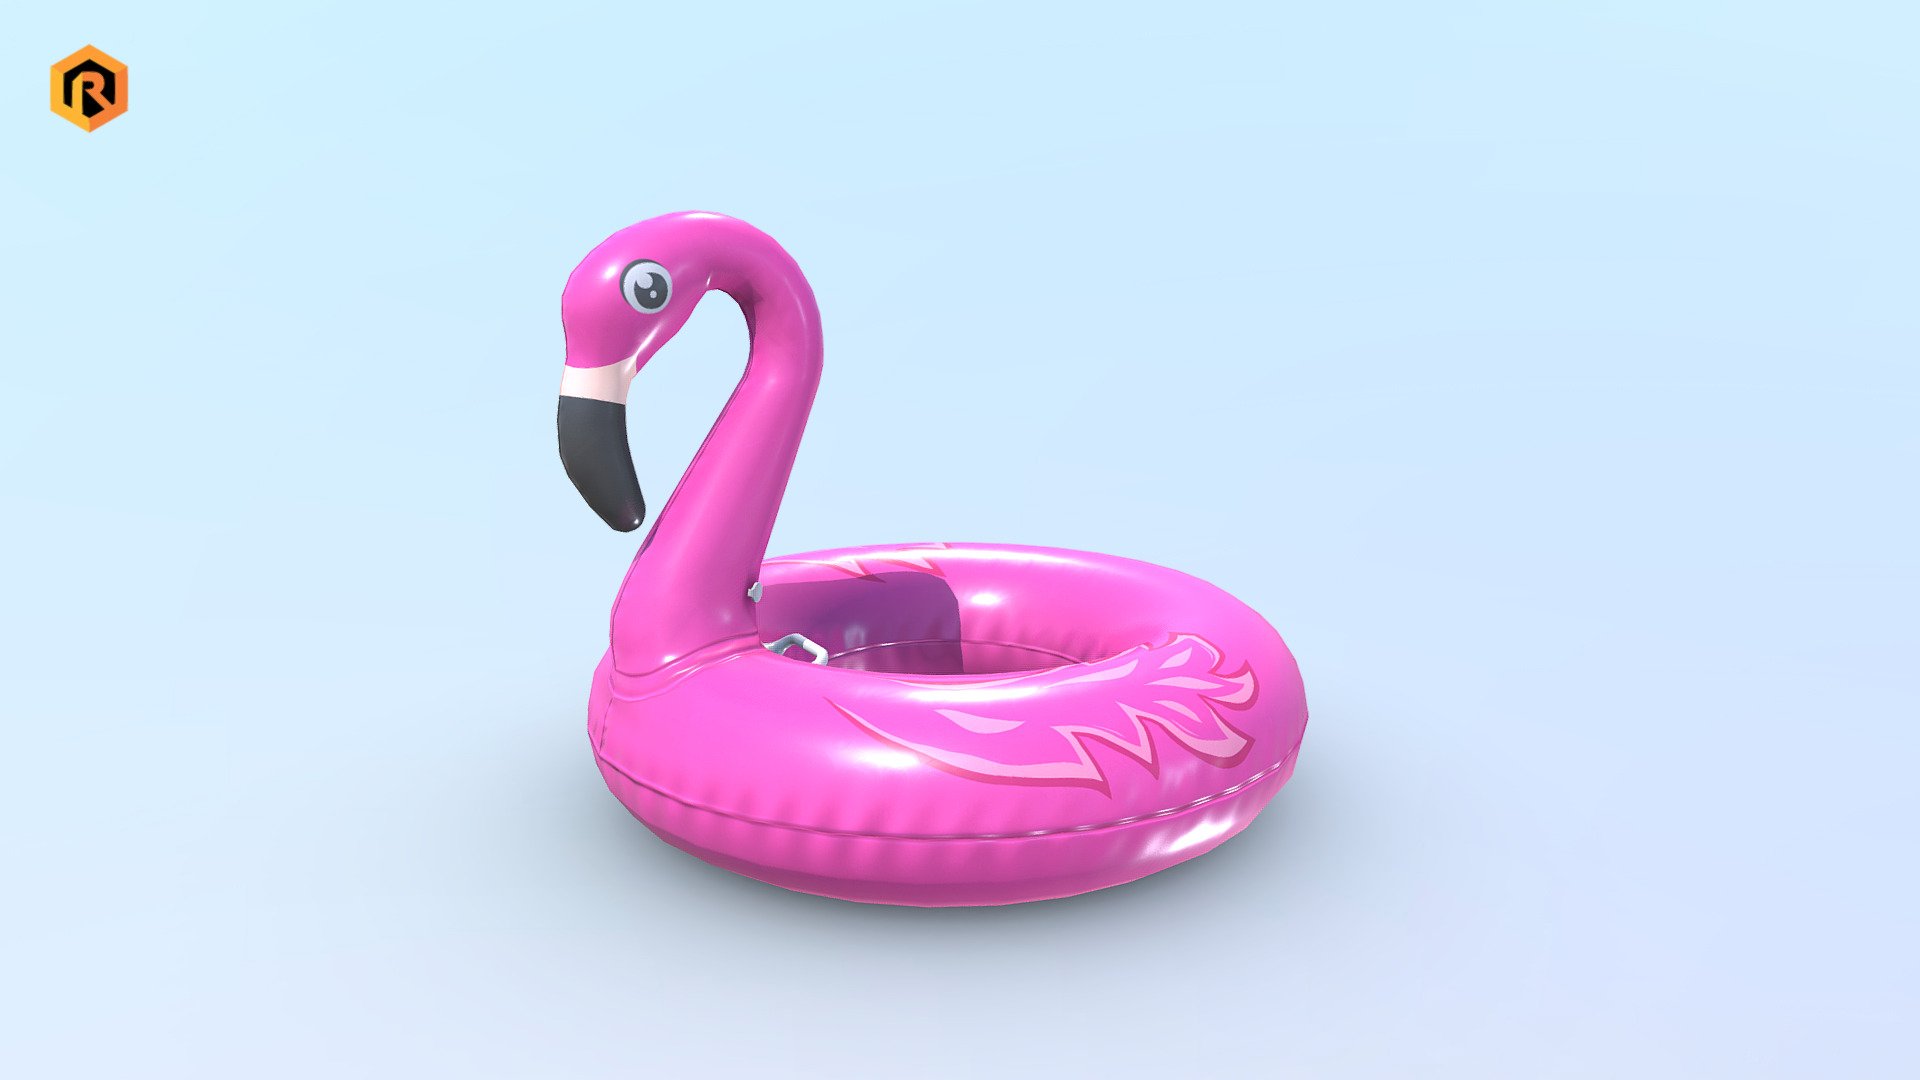 Low-poly PBR 3D model of Inflatable Pink Flamingo.

It is best for use in games and other VR / AR, real-time applications such as Unity or Unreal Engine.

It can also be rendered in Blender (ex Cycles) or Vray as the model is equipped with all required PBR textures.  

Technical details:  




PBR BeachToy texture set 4096 (Albedo, Metallic, Smoothness, Normal, AO)  

2050 Triangles  

1262  Vertices  

Model is one mesh  

Model completely unwrapped  

Lot of additional file formats included (Blender, Unity, UE4, Maya etc.)  

More file formats are available in additional zip file on product page.

Please feel free to contact me if you have any questions or need any support for this asset.

Support e-mail: support@rescue3d.com - Inflatable Pink Flamingo Toy - Buy Royalty Free 3D model by Rescue3D Assets (@rescue3d) 3d model